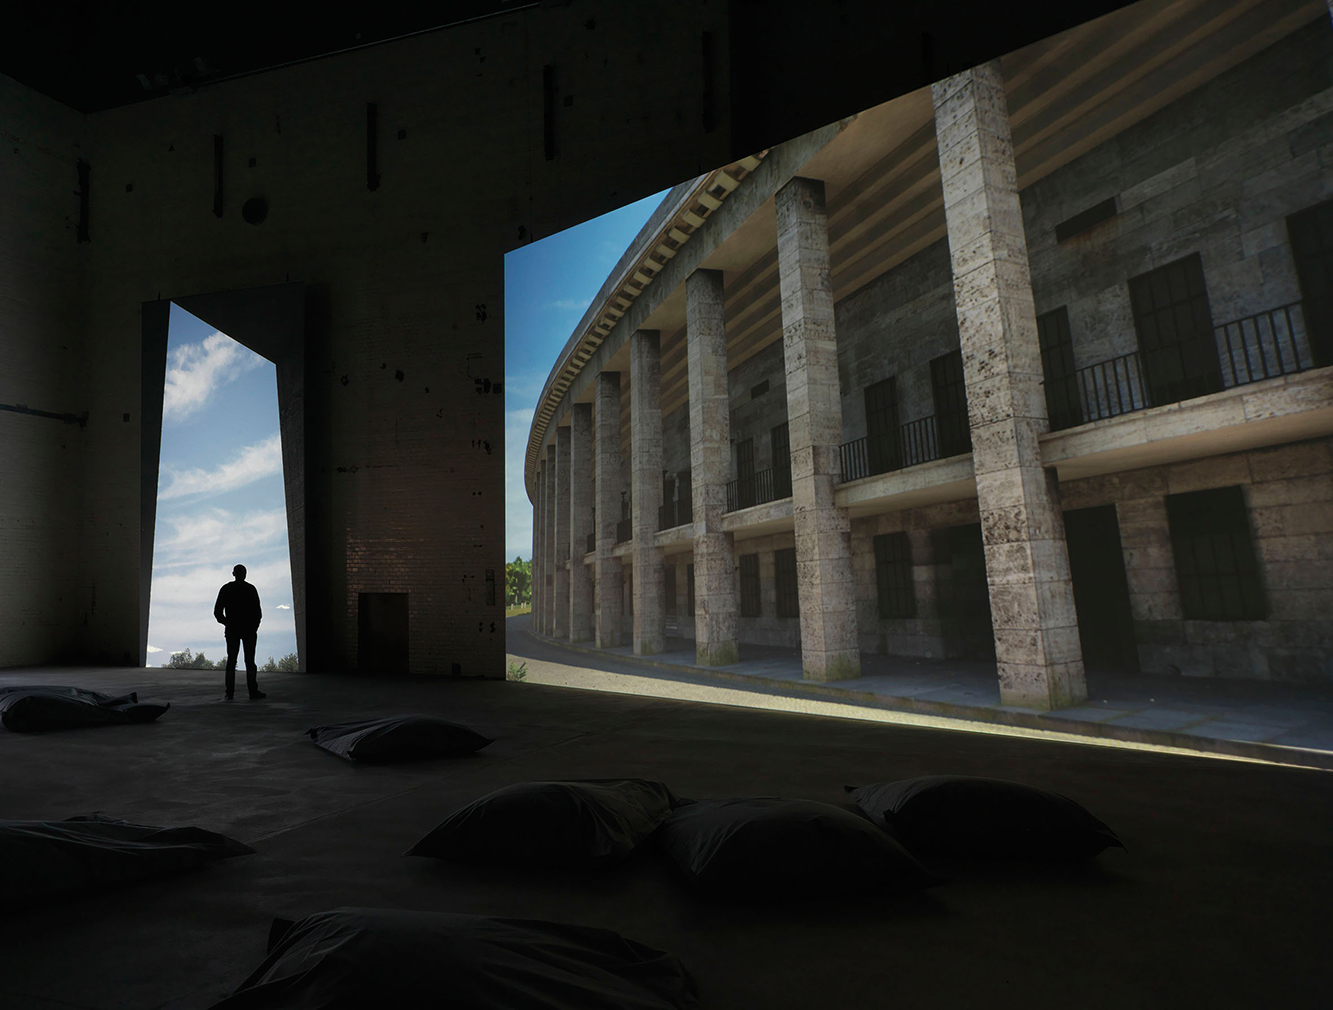 David Claerbout, ‘Olympia’, 2016. Real-time projection at KINDL’s Boiler House. Photography: Jens Ziehe, Berlin, 2016 (c) David Claerbout / VG BILD-KUNST, Bonn, 2016